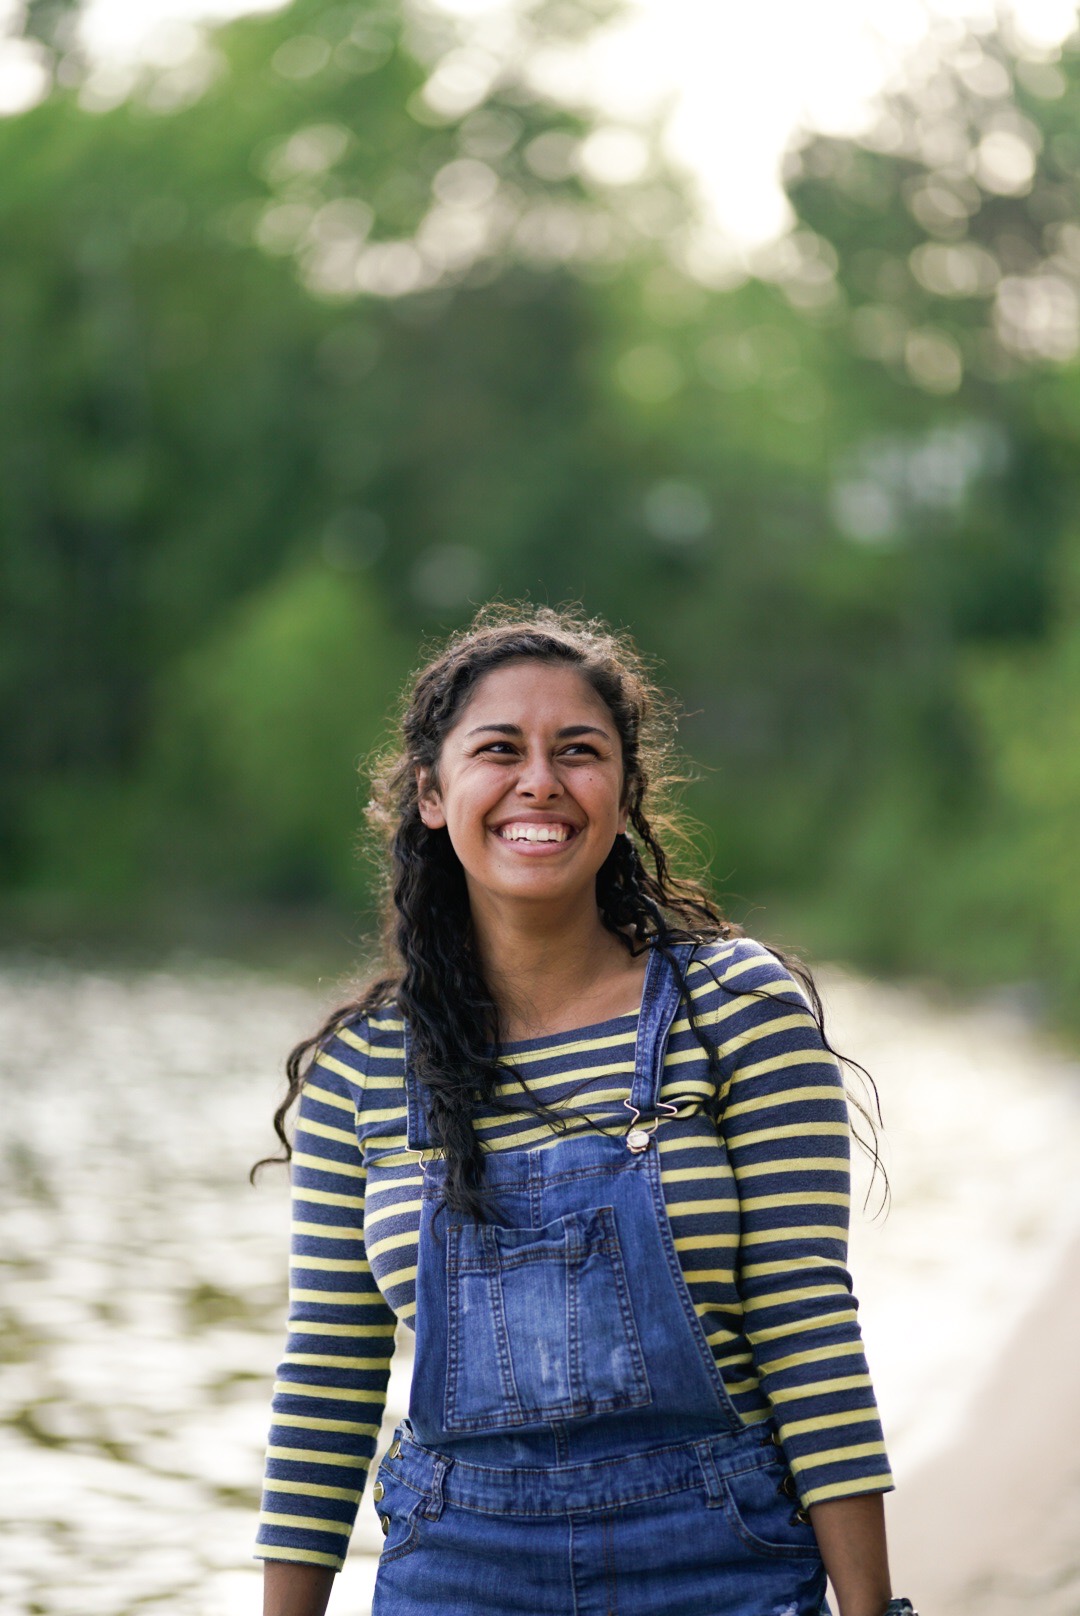 A woman with medium length brown curly hair laughs at the camera. She is standing outside with trees in the background, wearing denim overalls and a yellow and black striped shirt.